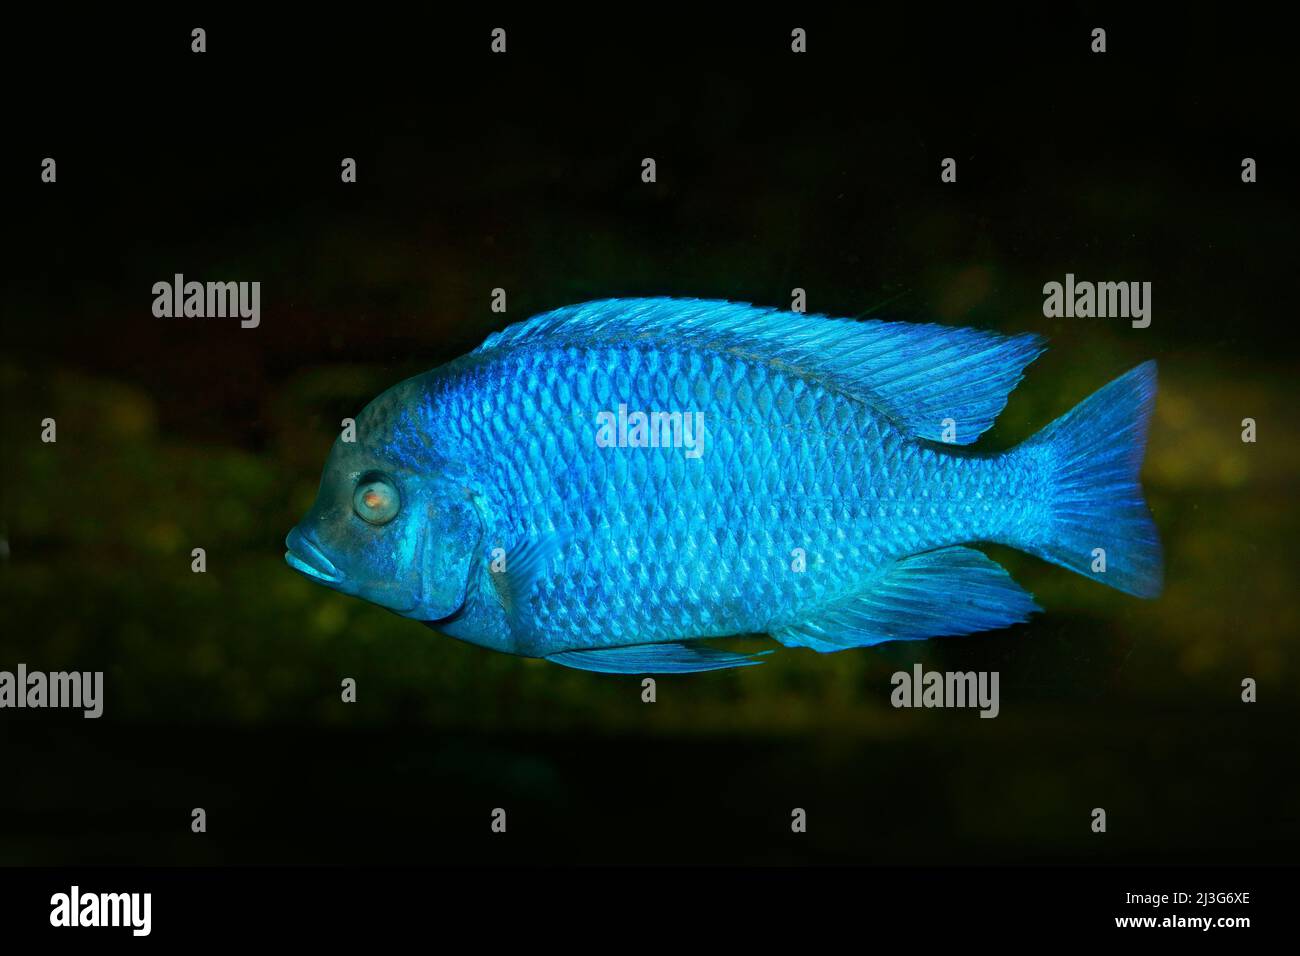 Copadichromis borleyi, cichlid fish endemic Lake Malawi in East Africa. Blue fish in the water. Fishkeeping hobby specie of fish. Dark water with anim Stock Photo